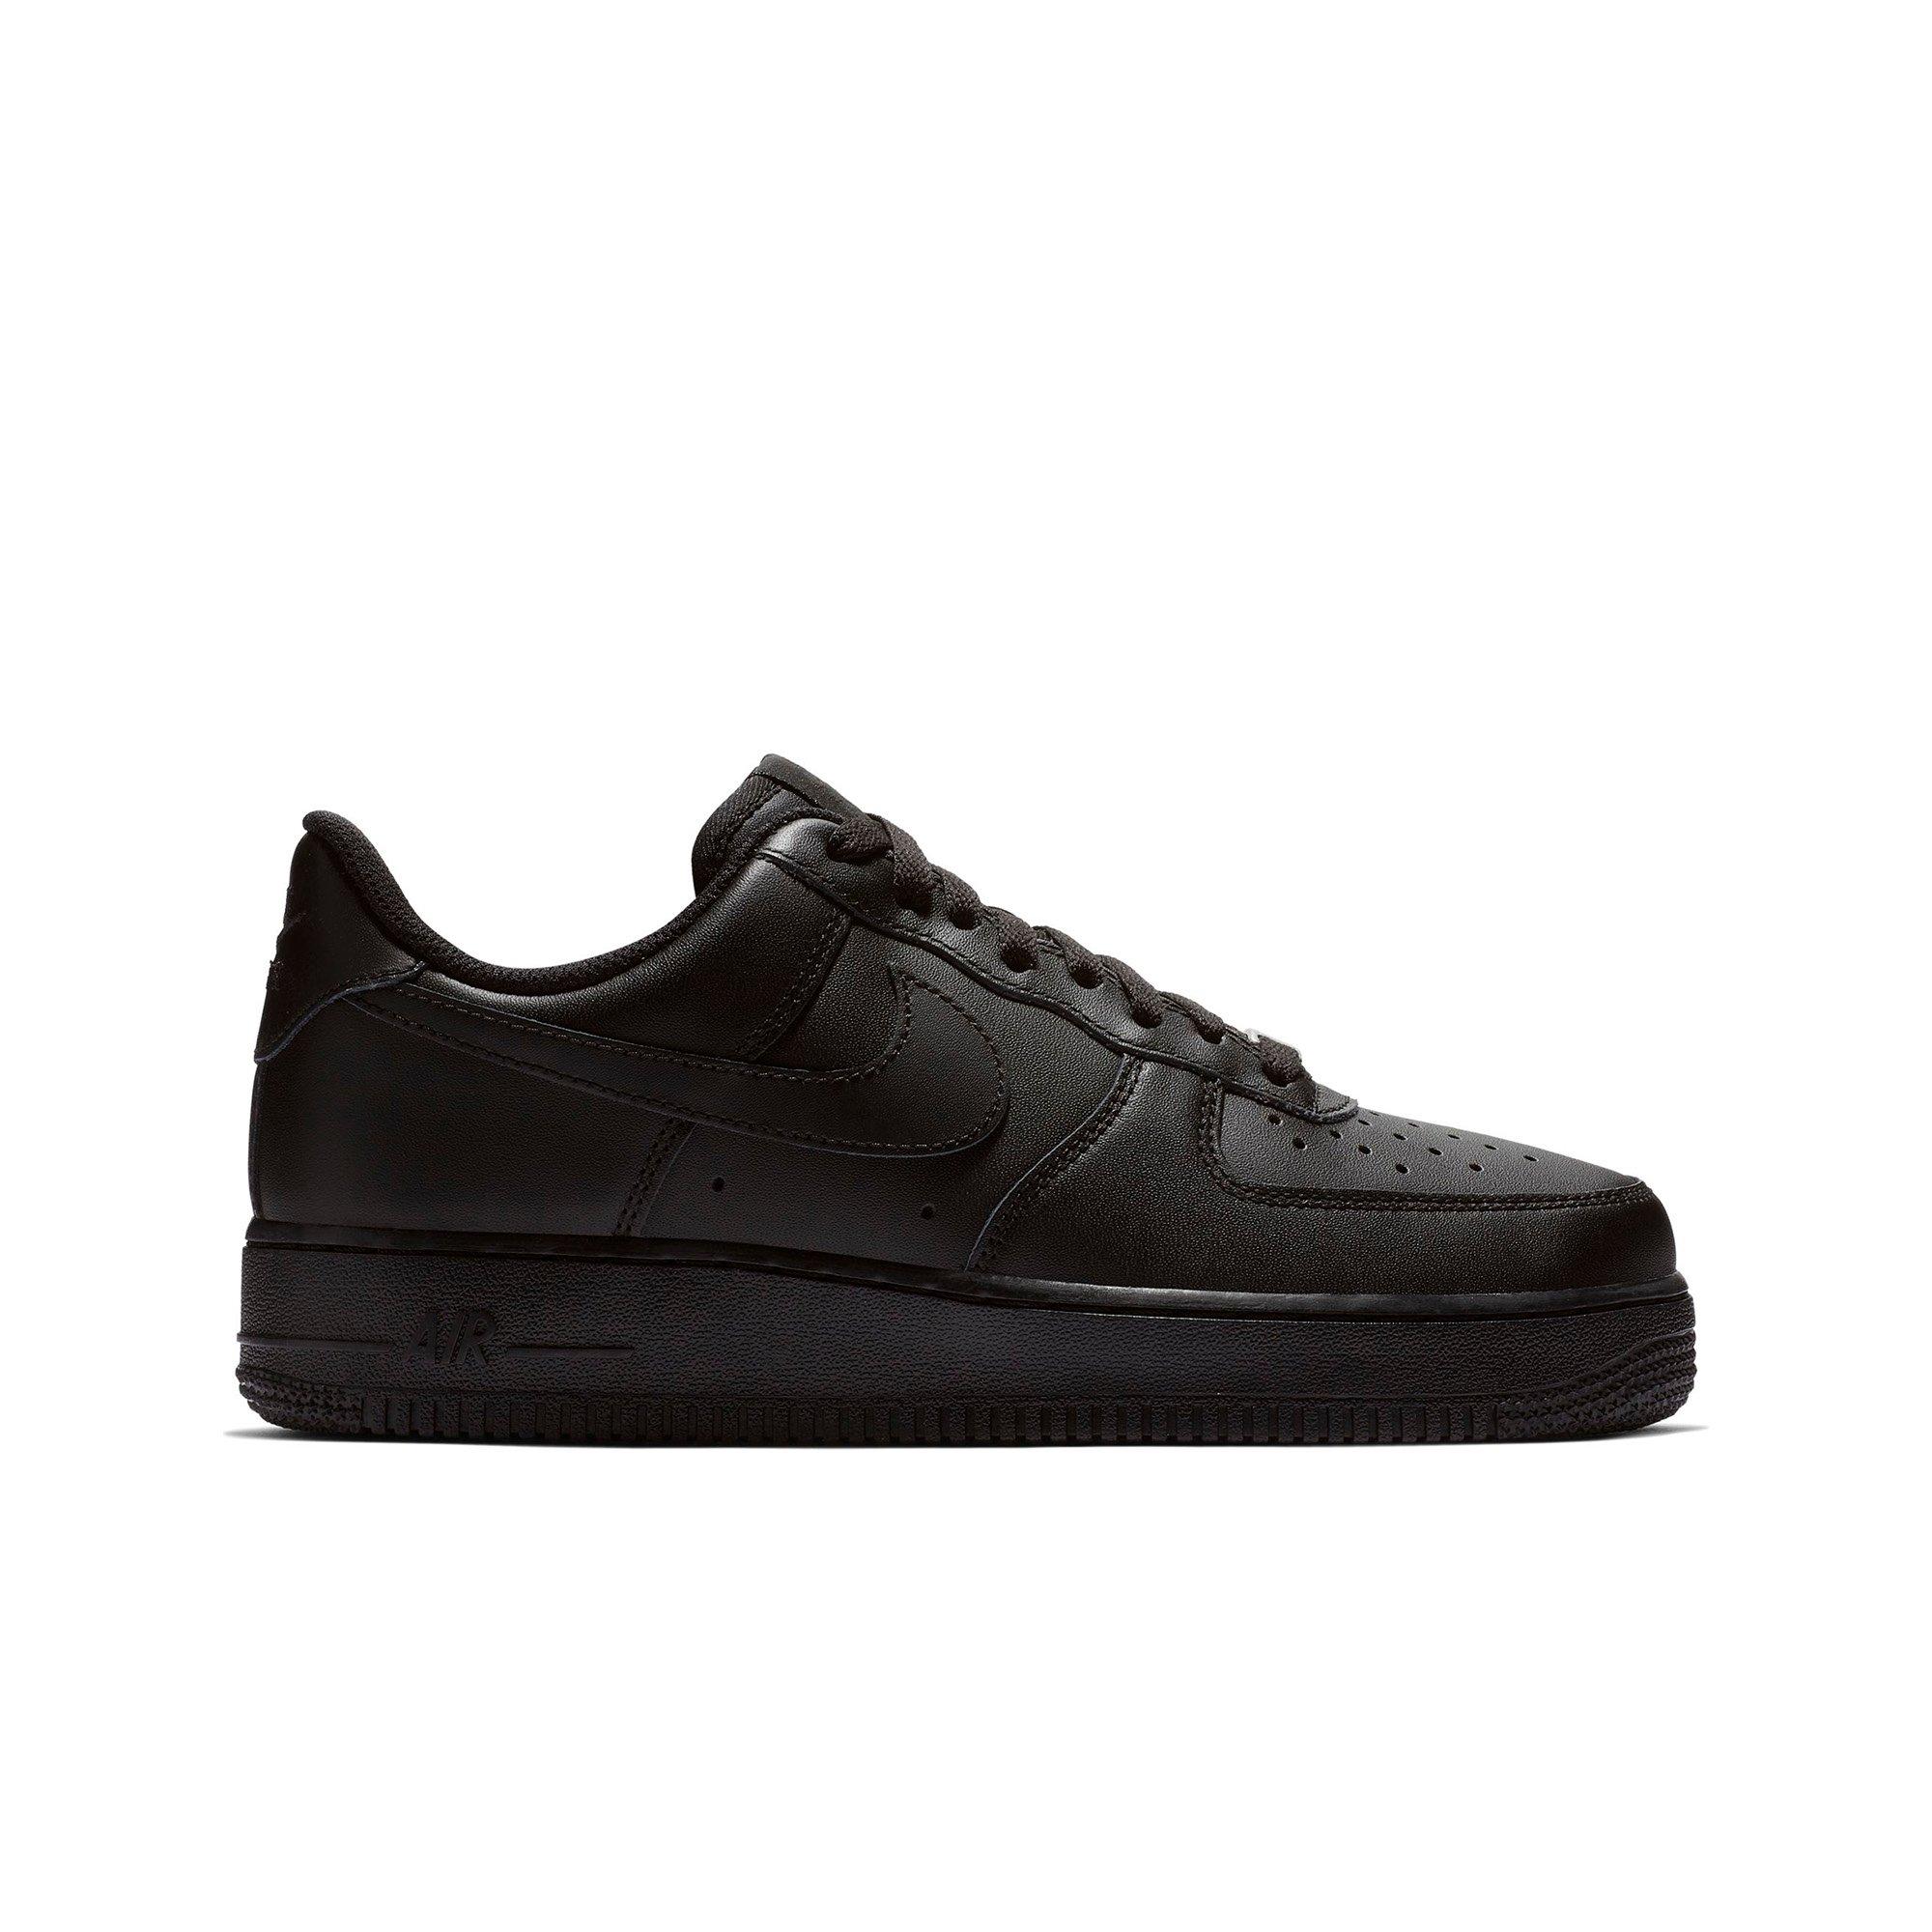 nike women's shoes leather